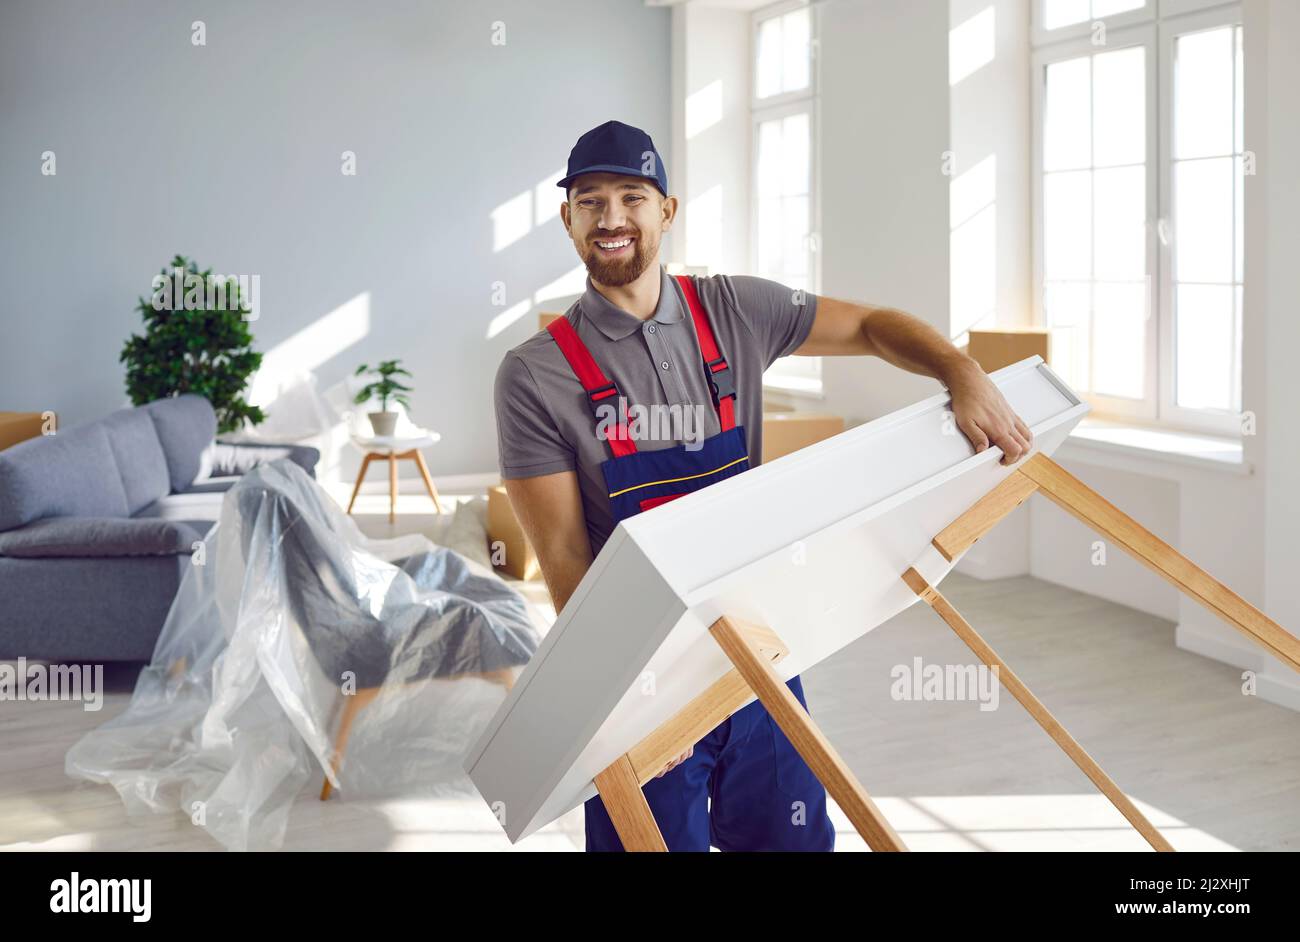 Happy young truck delivery or moving company worker carrying furniture and smiling Stock Photo